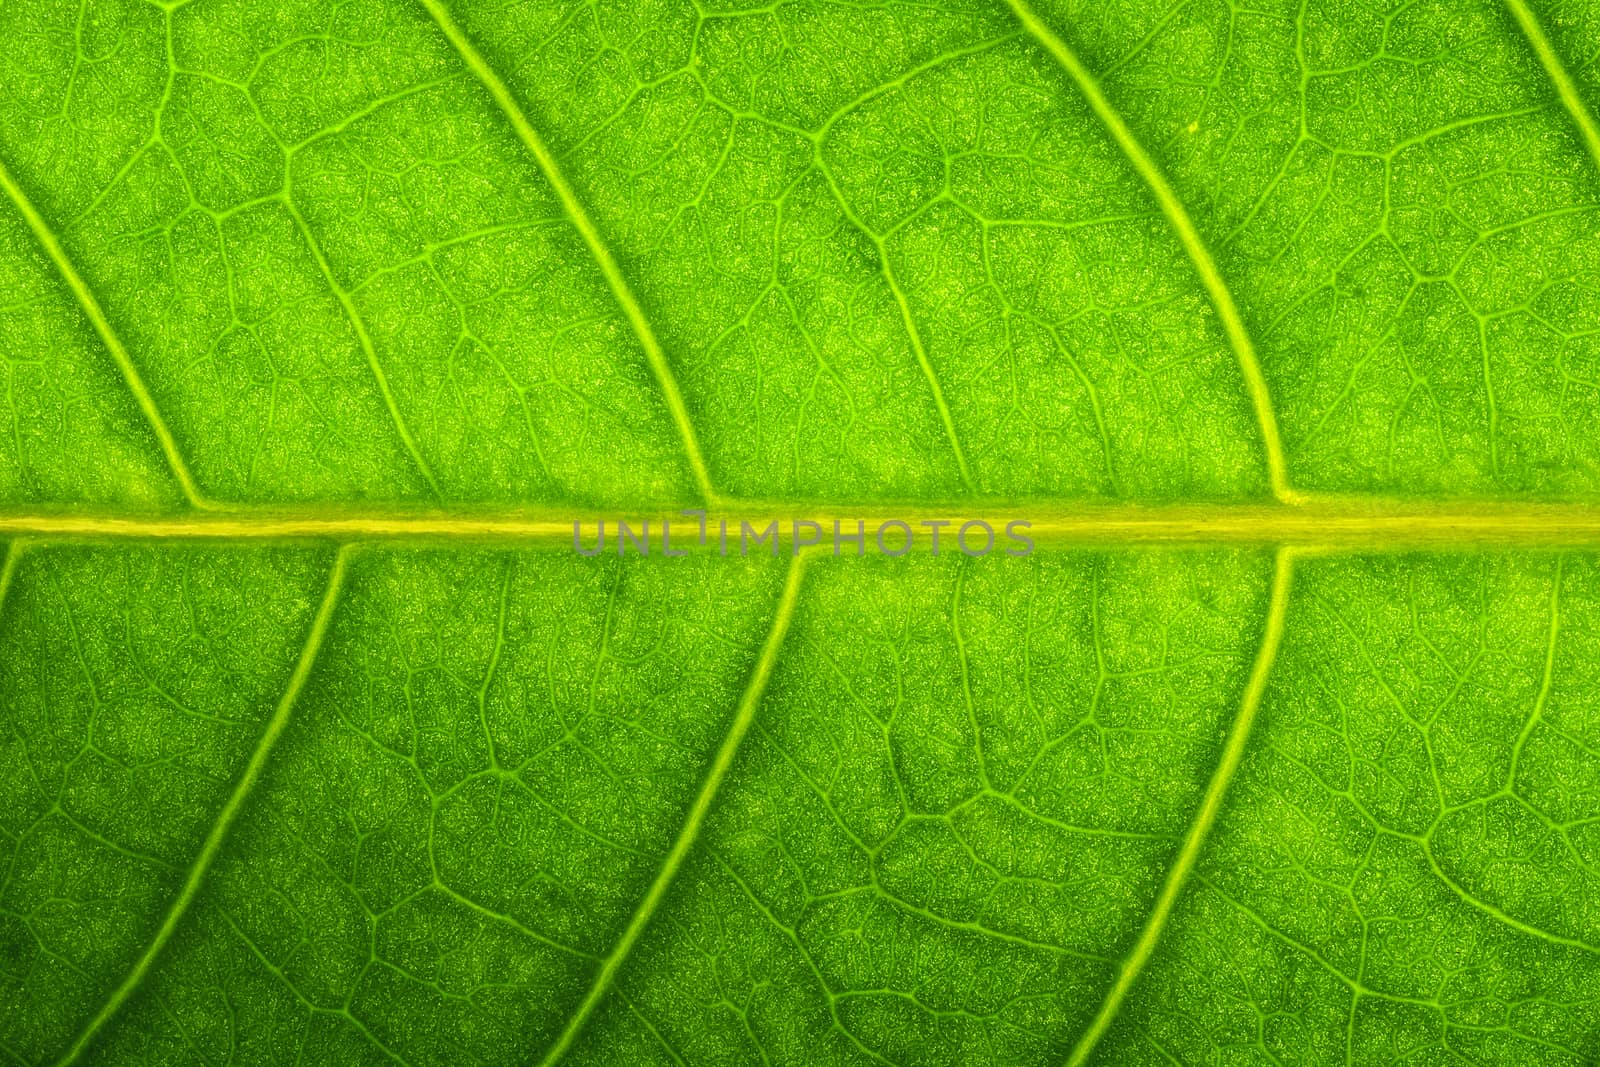 Close up of a green leaf background